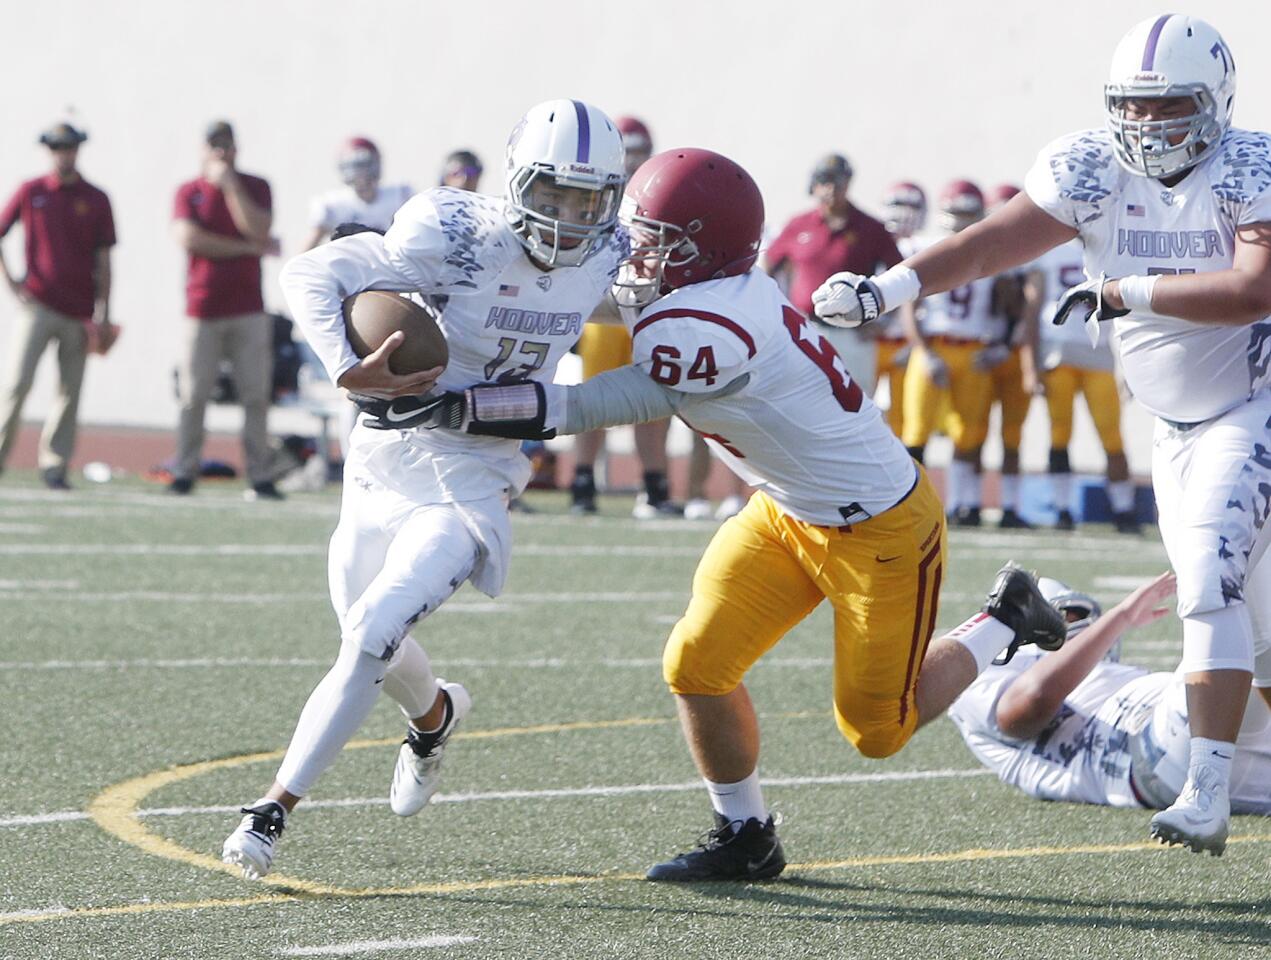 Photo Gallery: Football season opener in non-league game between Hoover and La Canada